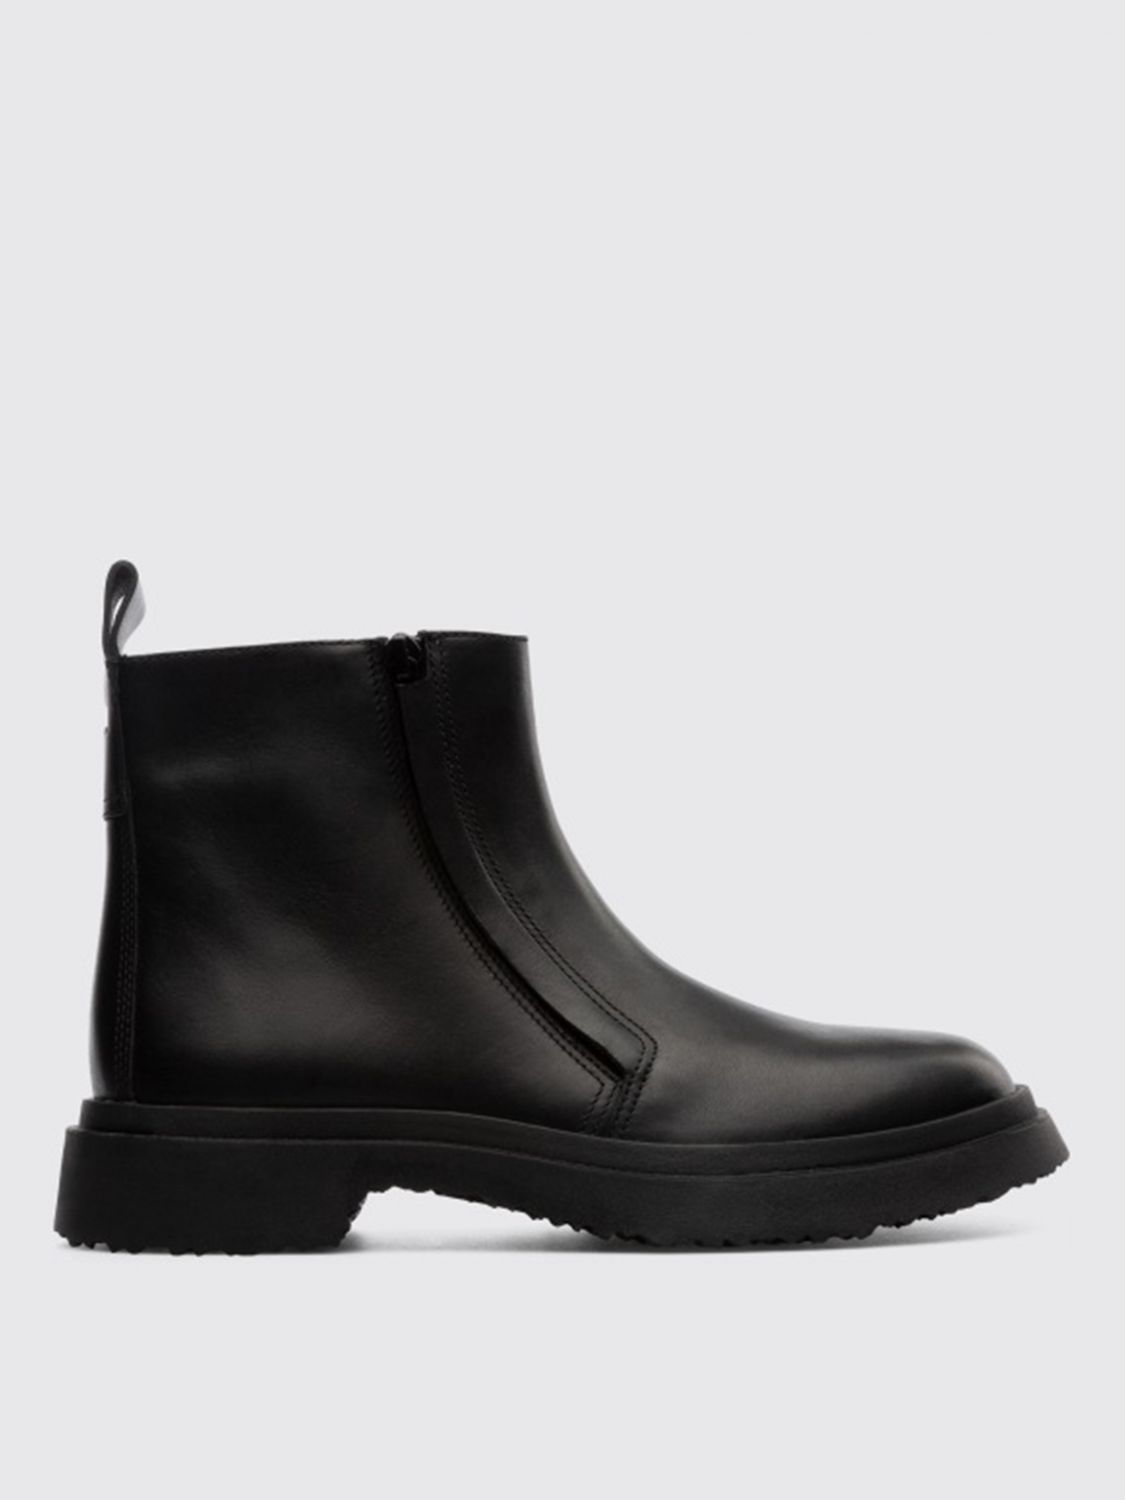 Camper Right Calfskin Ankle Boots (Boots,Flat Boots)